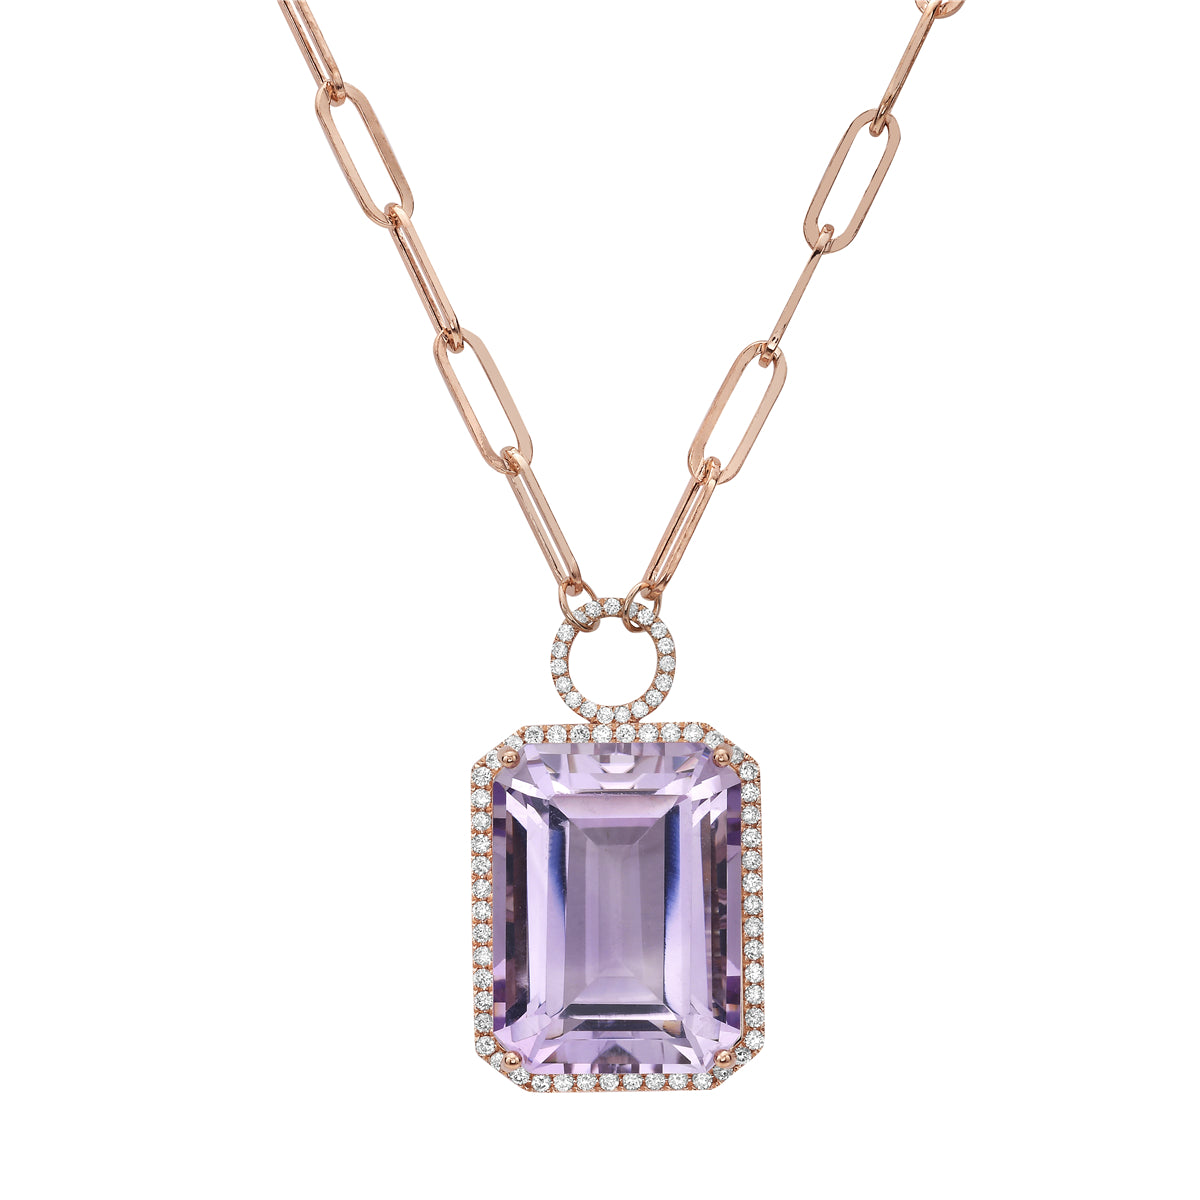 Necklace 14KR/3.1G 1RDF-22.11CT 69RD-0.49CT